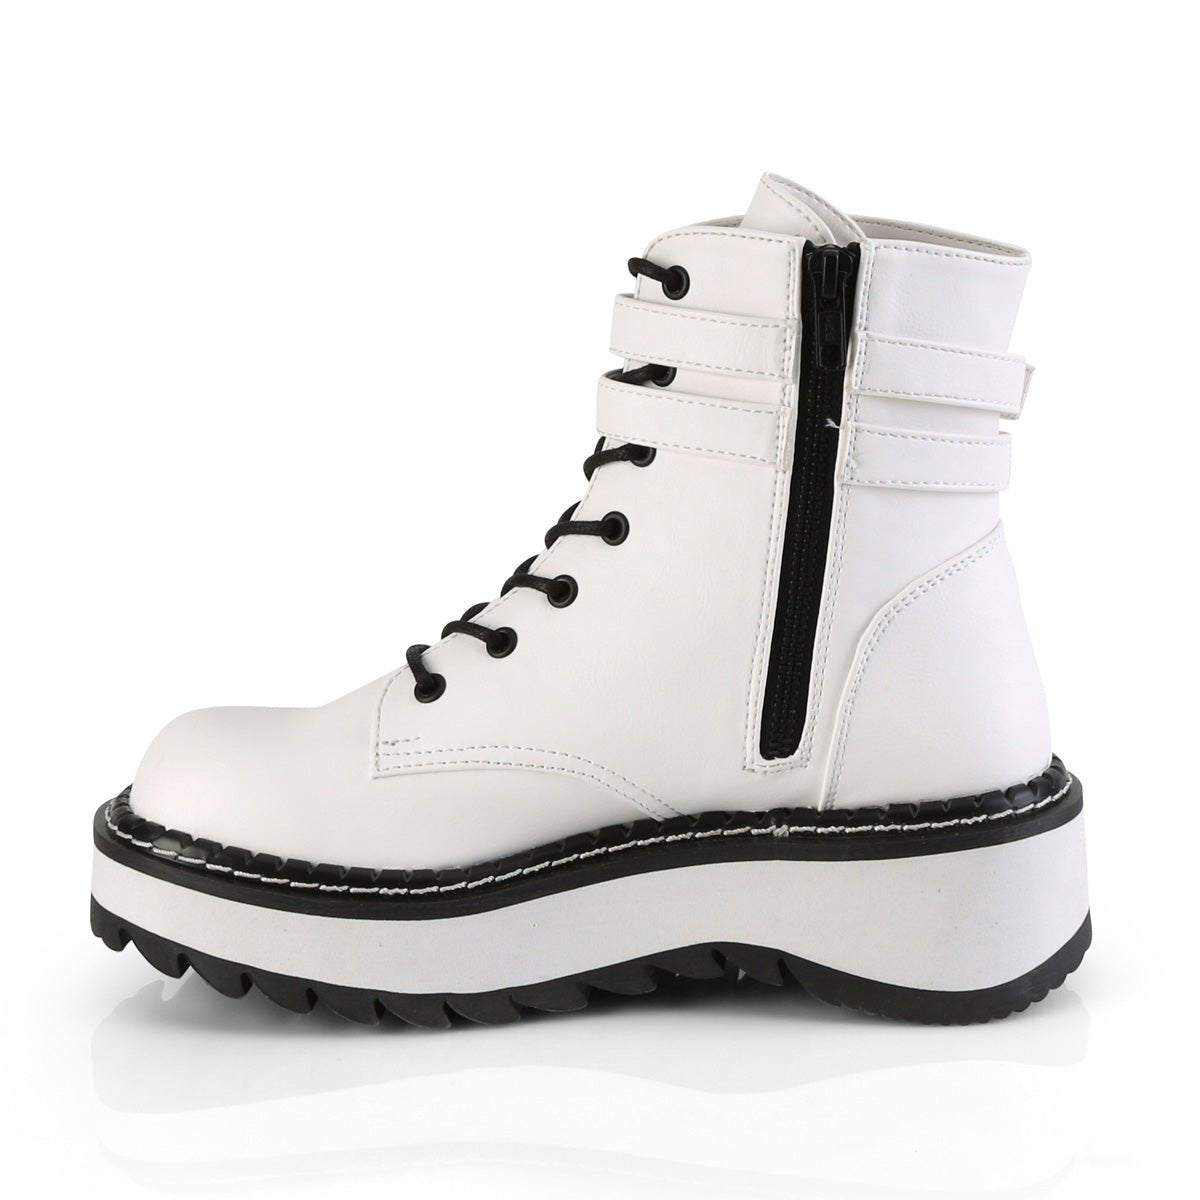 Too Fast | Demonia Lilith 152 | White Vegan Leather Women's Ankle Boots